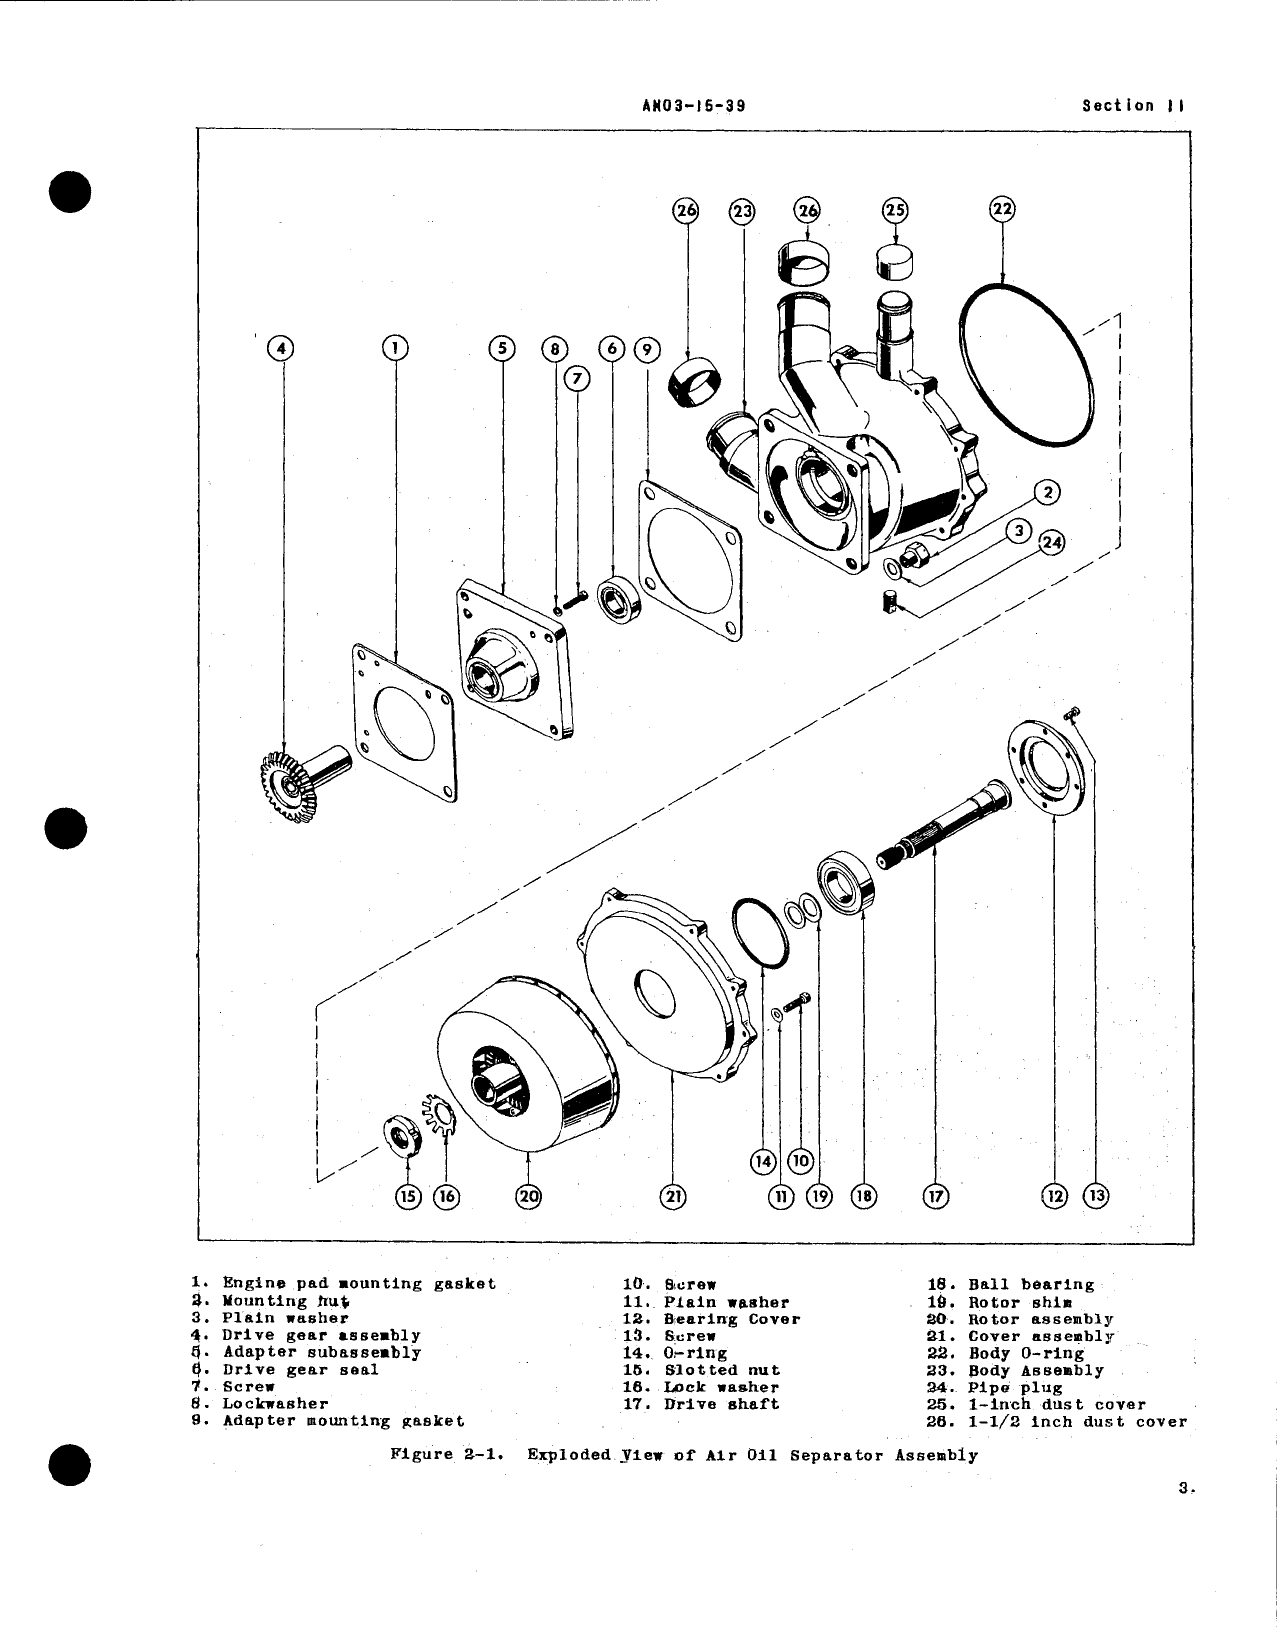 Sample page 5 from AirCorps Library document: Overhaul Instructions for Model TM-38600 Air-Oil Separator (Thompson)